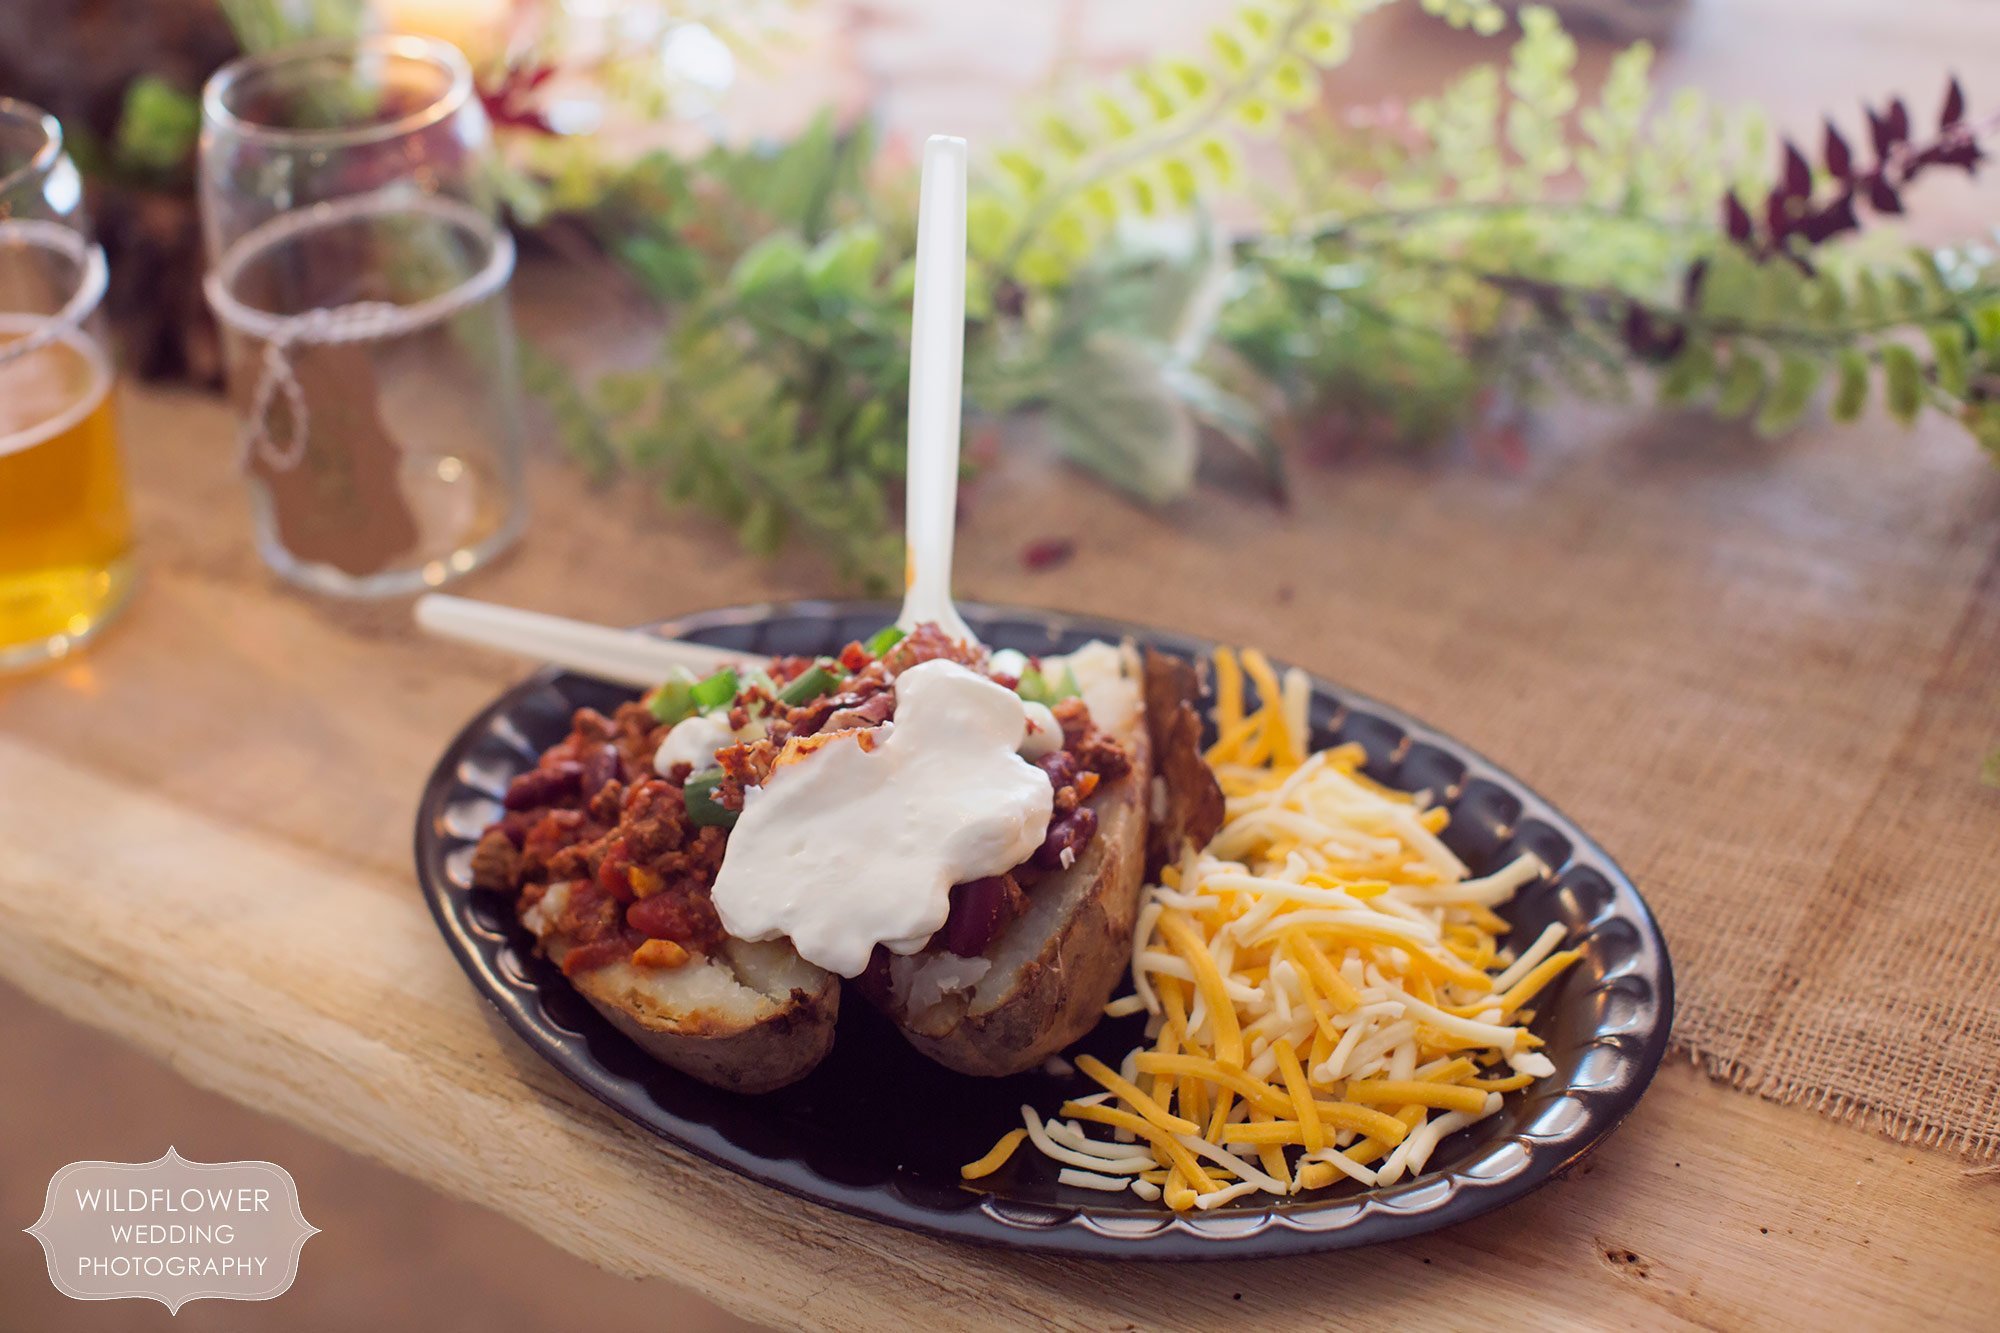 Loaded baked potato bar lunch wedding idea at this winter wedding in mid-MO.